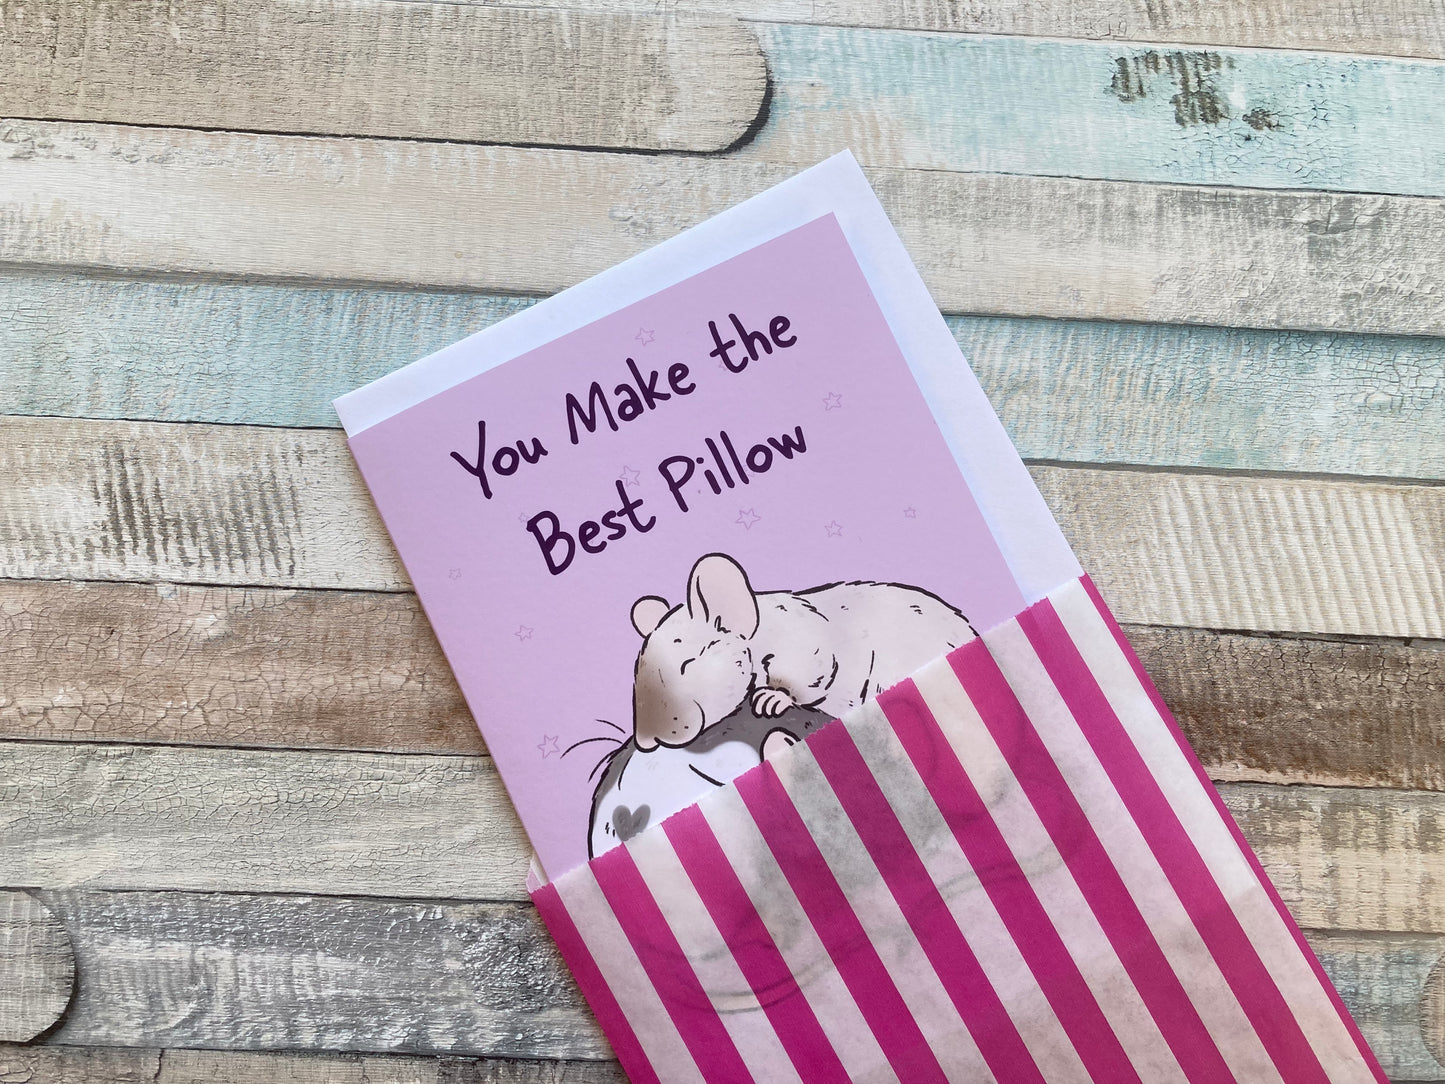 You Make The Best Pillow | Cute Rat Valentines Day Card